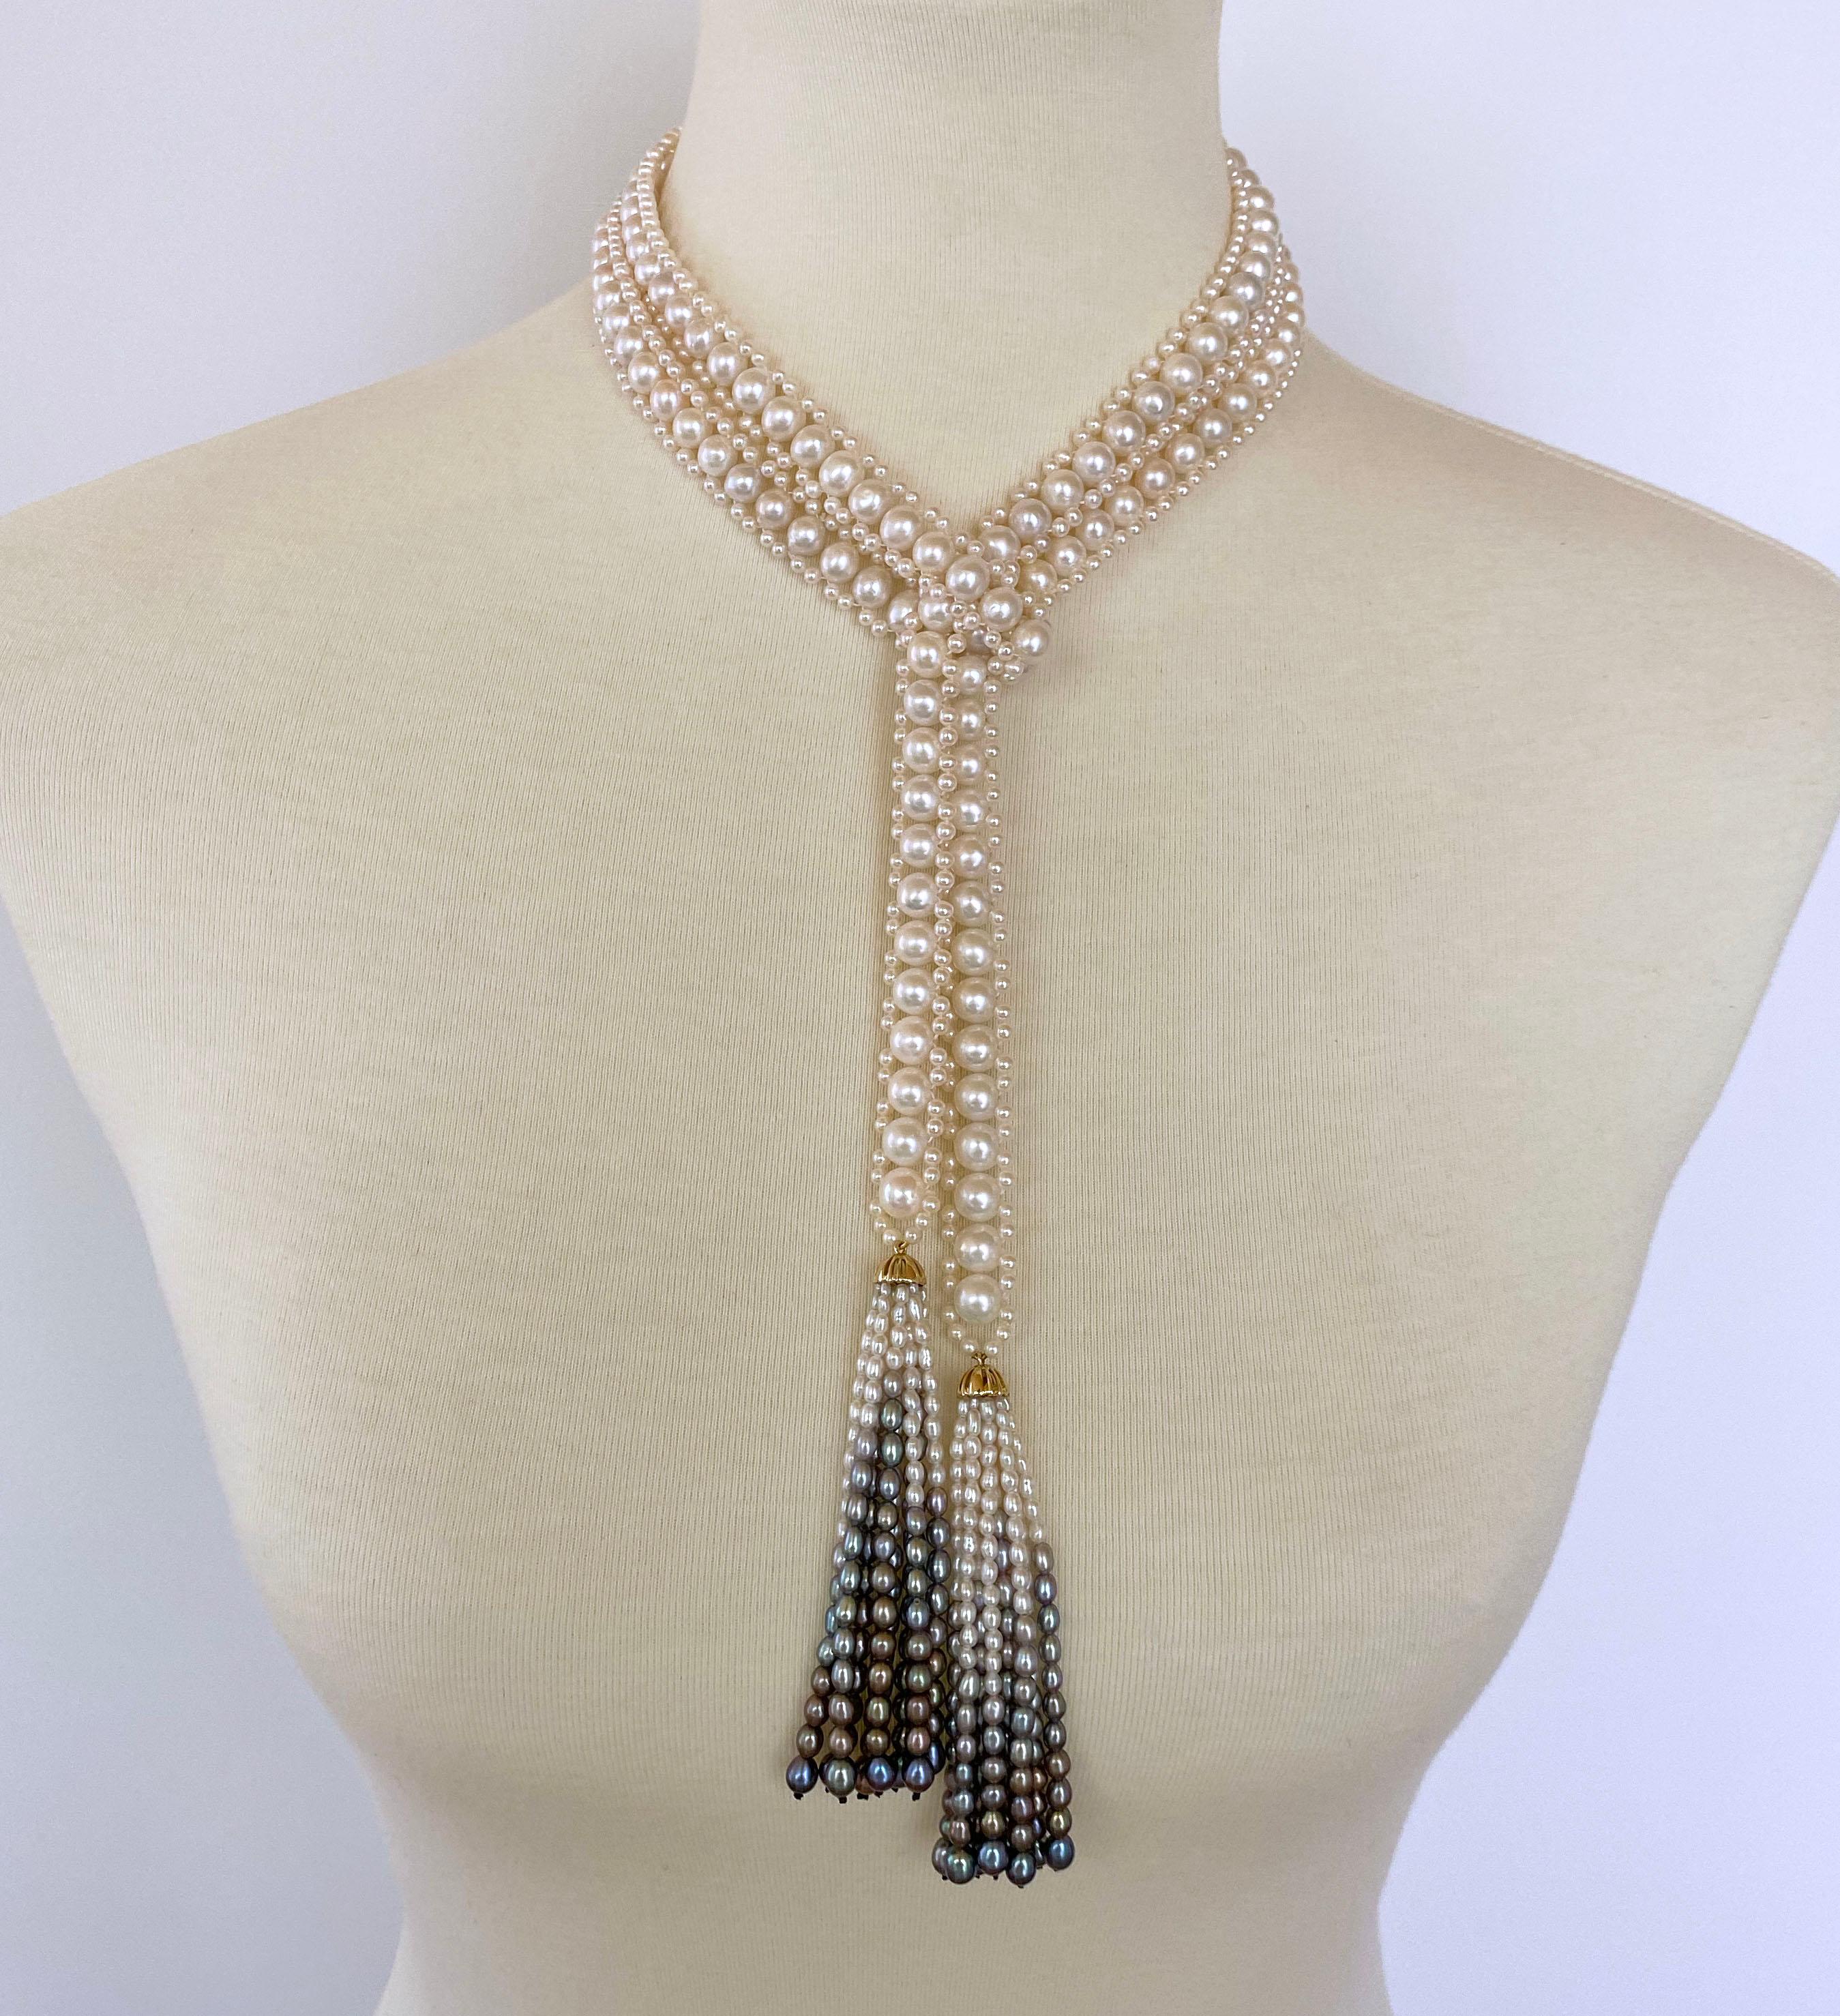 Classic Marina J. hand woven Sautoir made with all high luster 2mm - 7mm Pearls. This gorgeous Sautoir measures 51 inches including Tassels; allowing versatility in wear (as seen in images). This piece can be worn down, doubled around the neck or